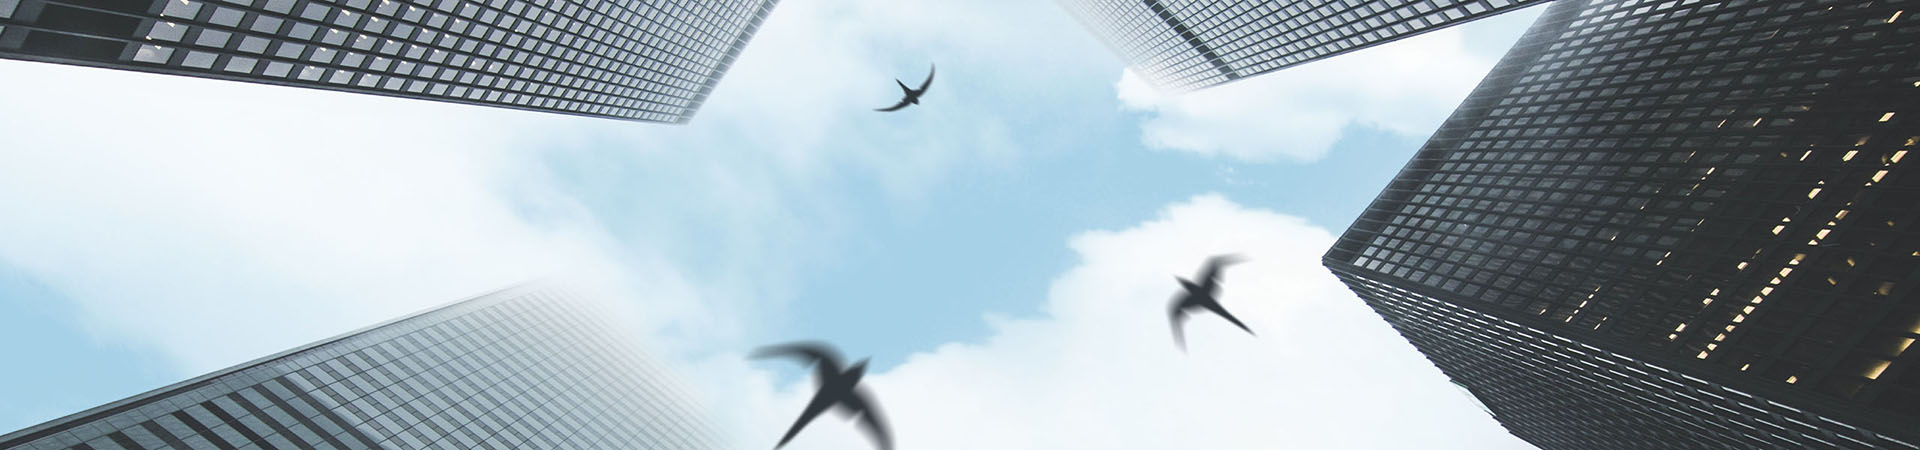 Three swallow birds flying among the skyscrapers of Astrum Assistance Alliance AG members, symbolizing unity and collaboration